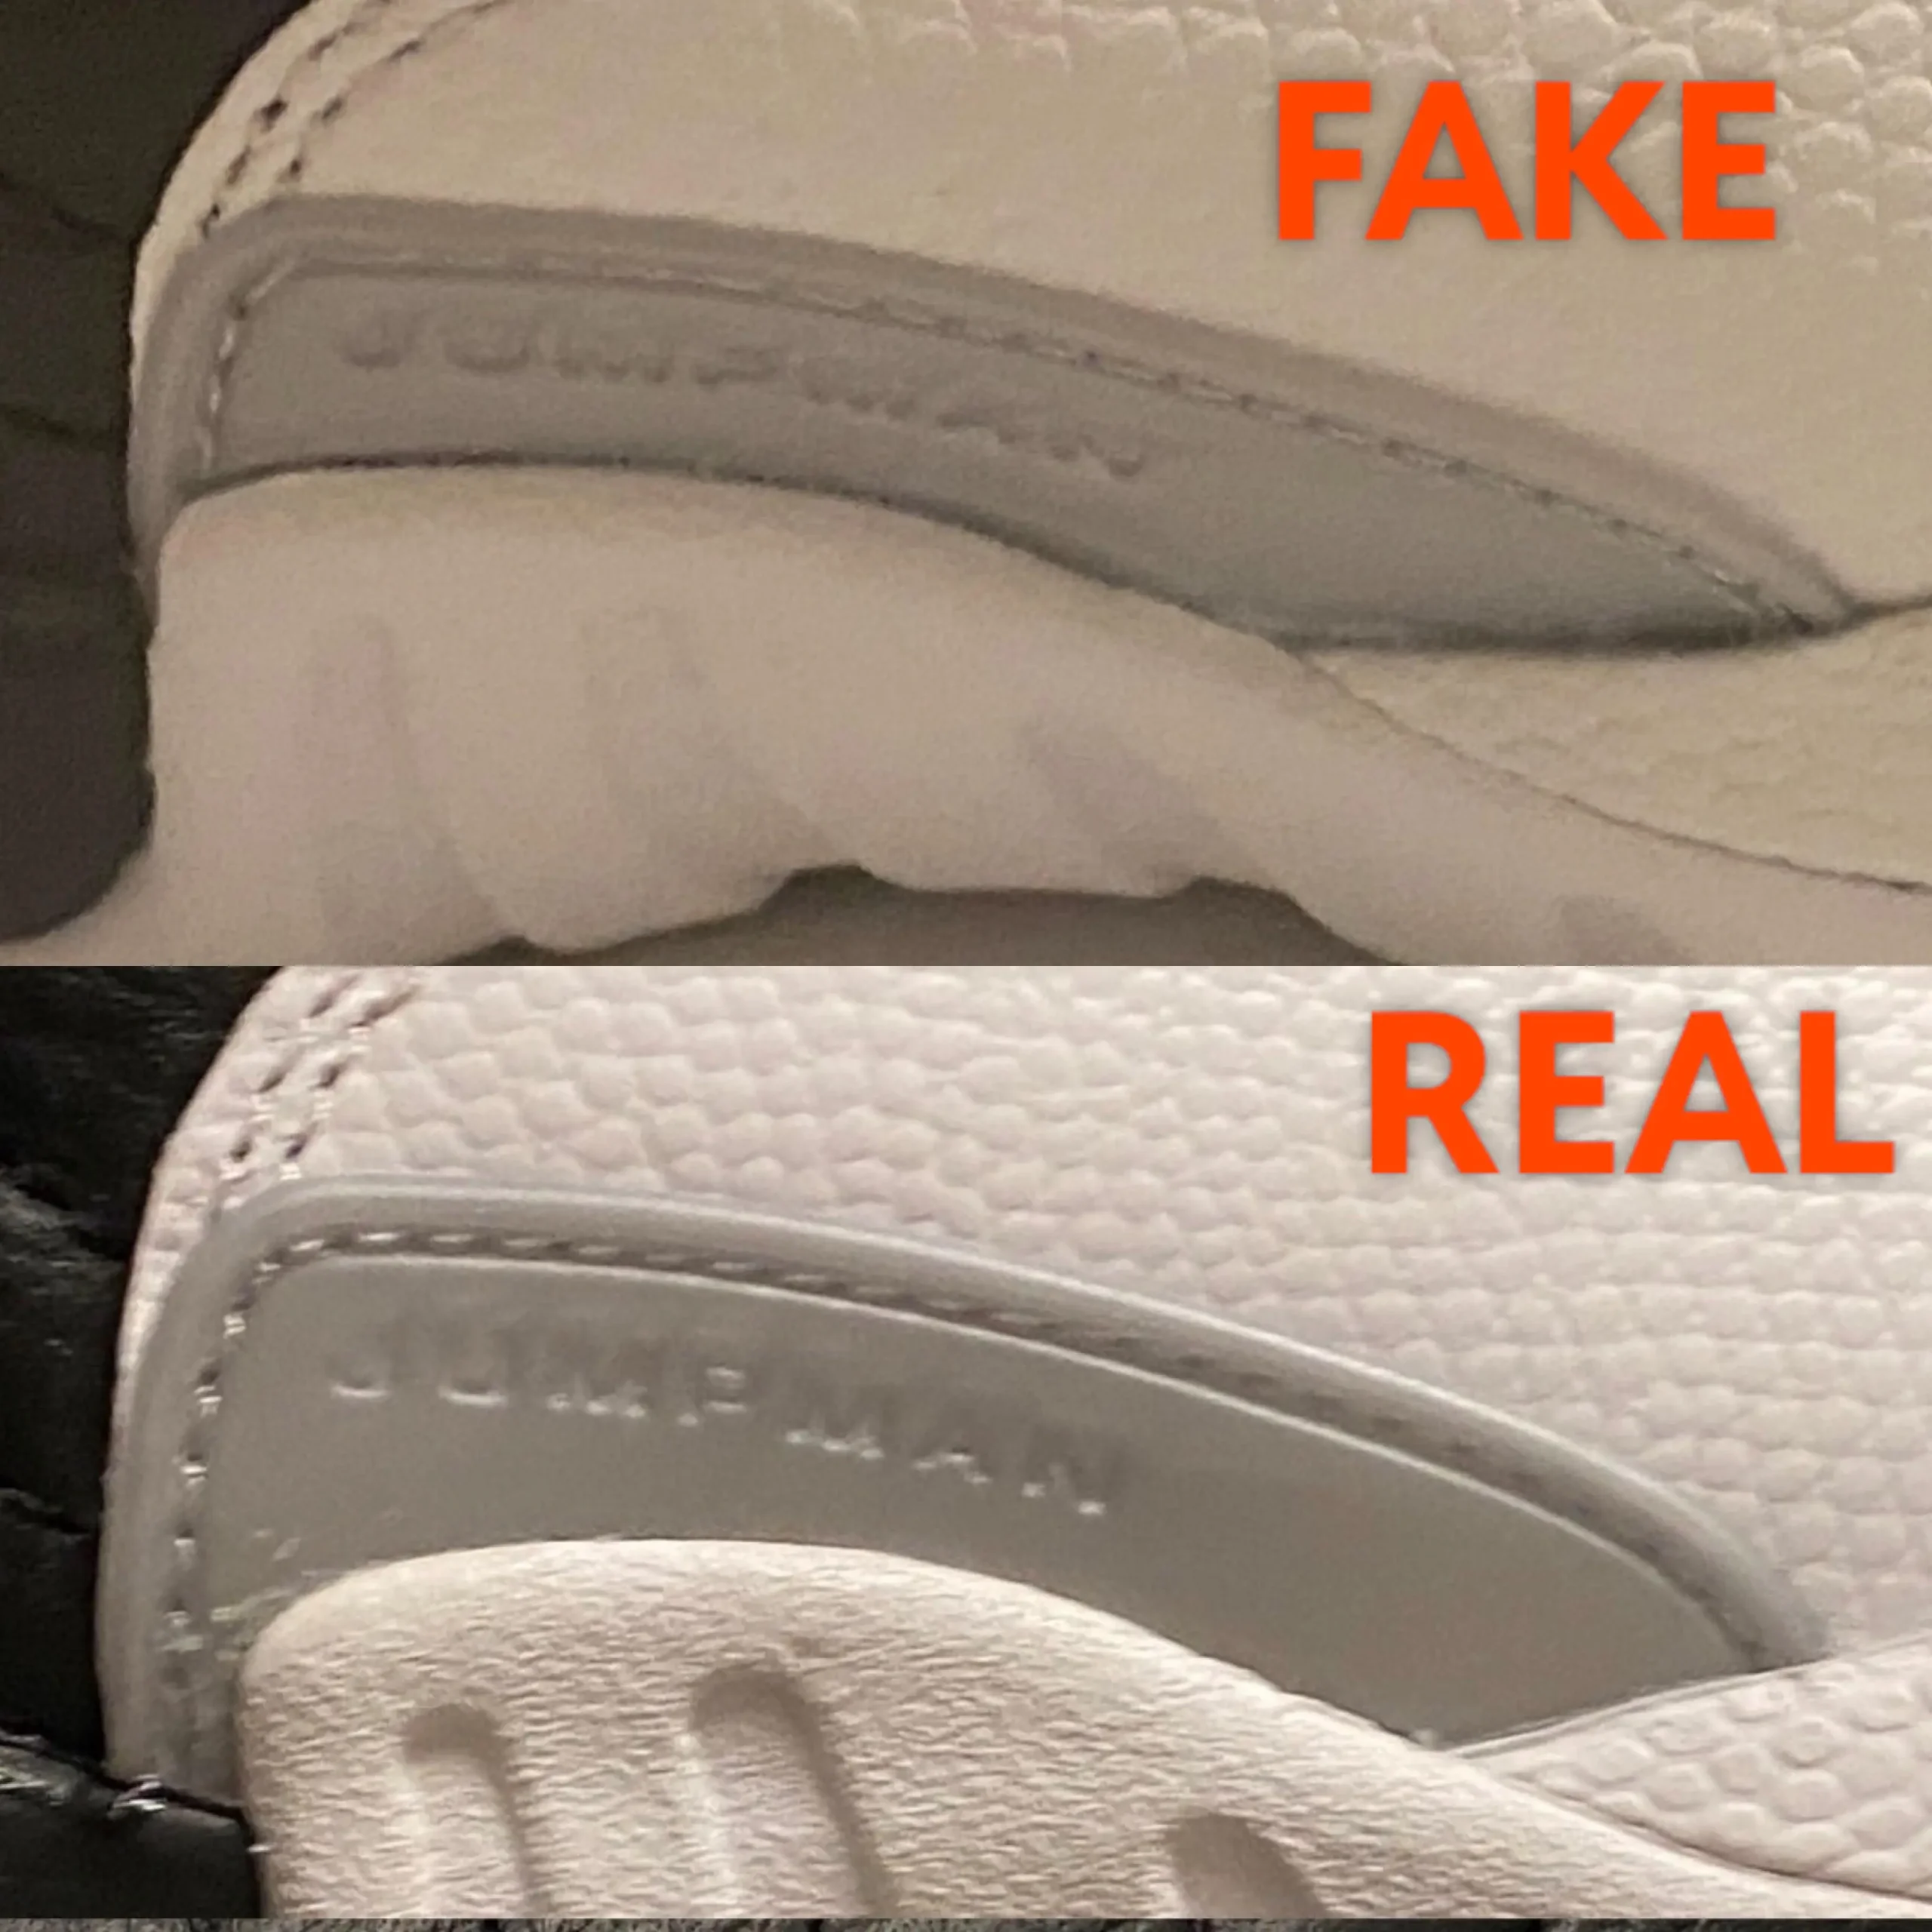 How To Spot Fake GOAT Shoes